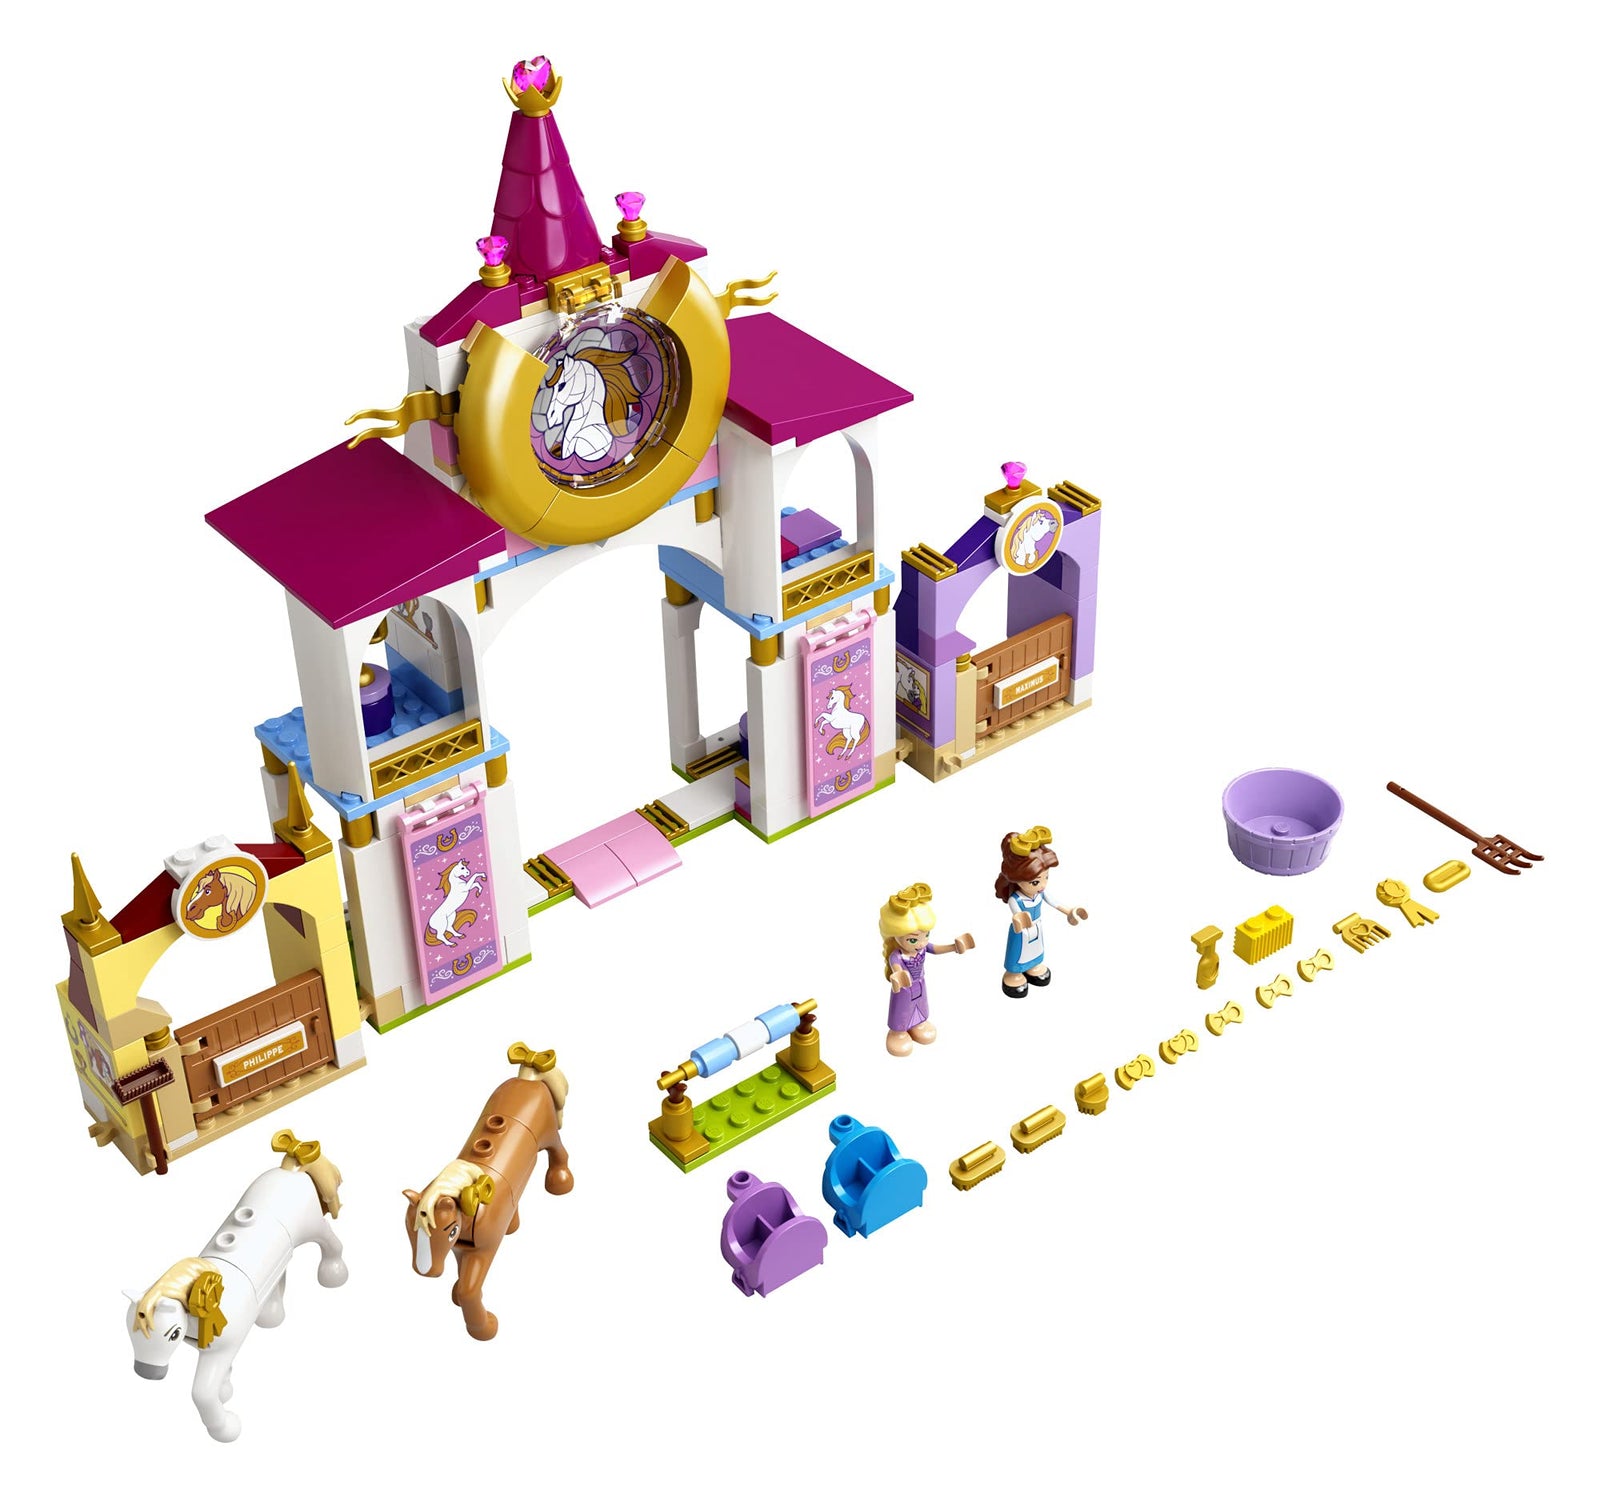 LEGO Disney Belle and Rapunzel’s Royal Stables 43195 Building Kit; Great for Inspiring Imaginative, Creative Play (239 Pieces)